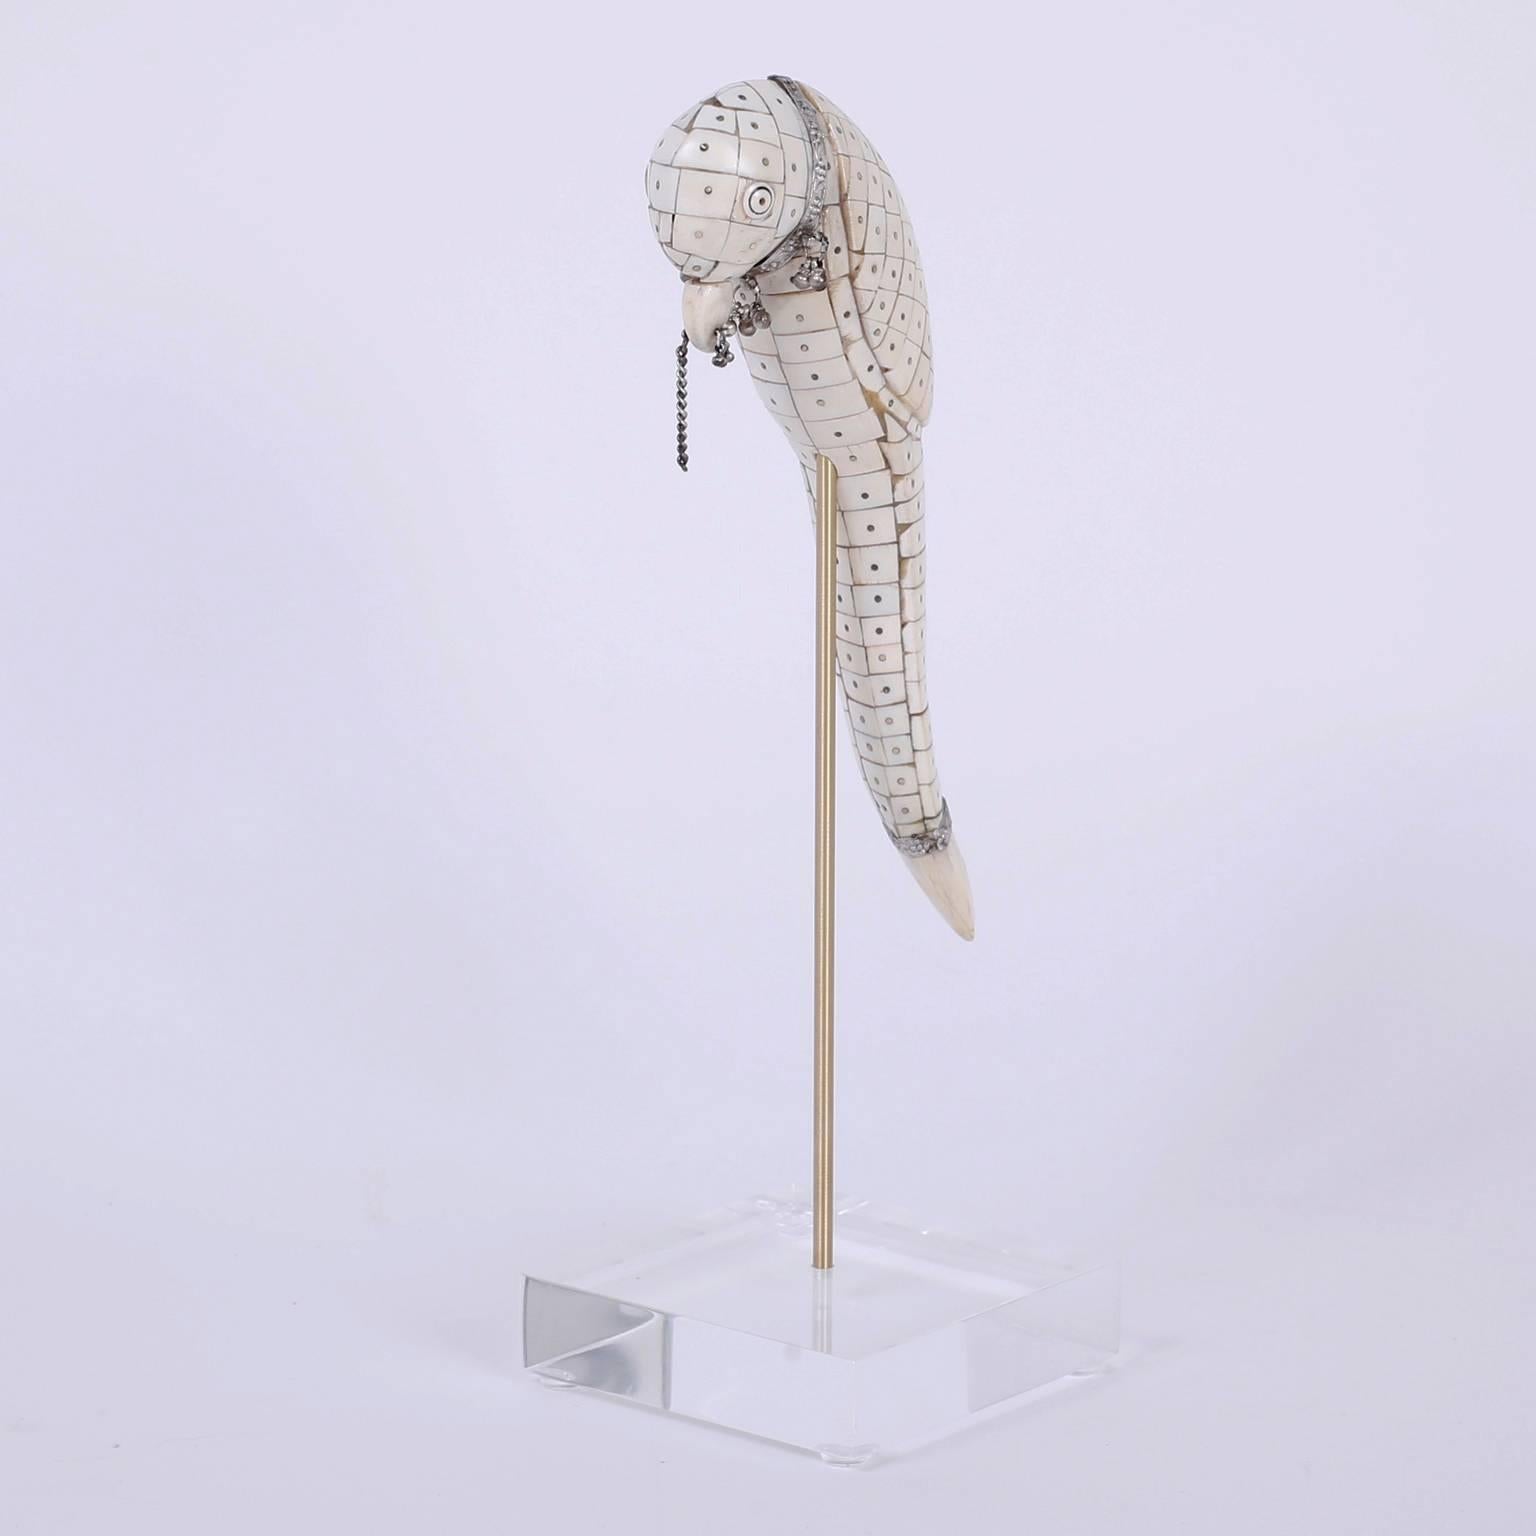 Intriguing Anglo-Indian Parrot sculpture skillfully crafted with a mosaic of ox bone fragments. This stylish bird is sporting hand-hammered silver jewelry including a nose ring, all this presented on a brass rod and Lucite base.